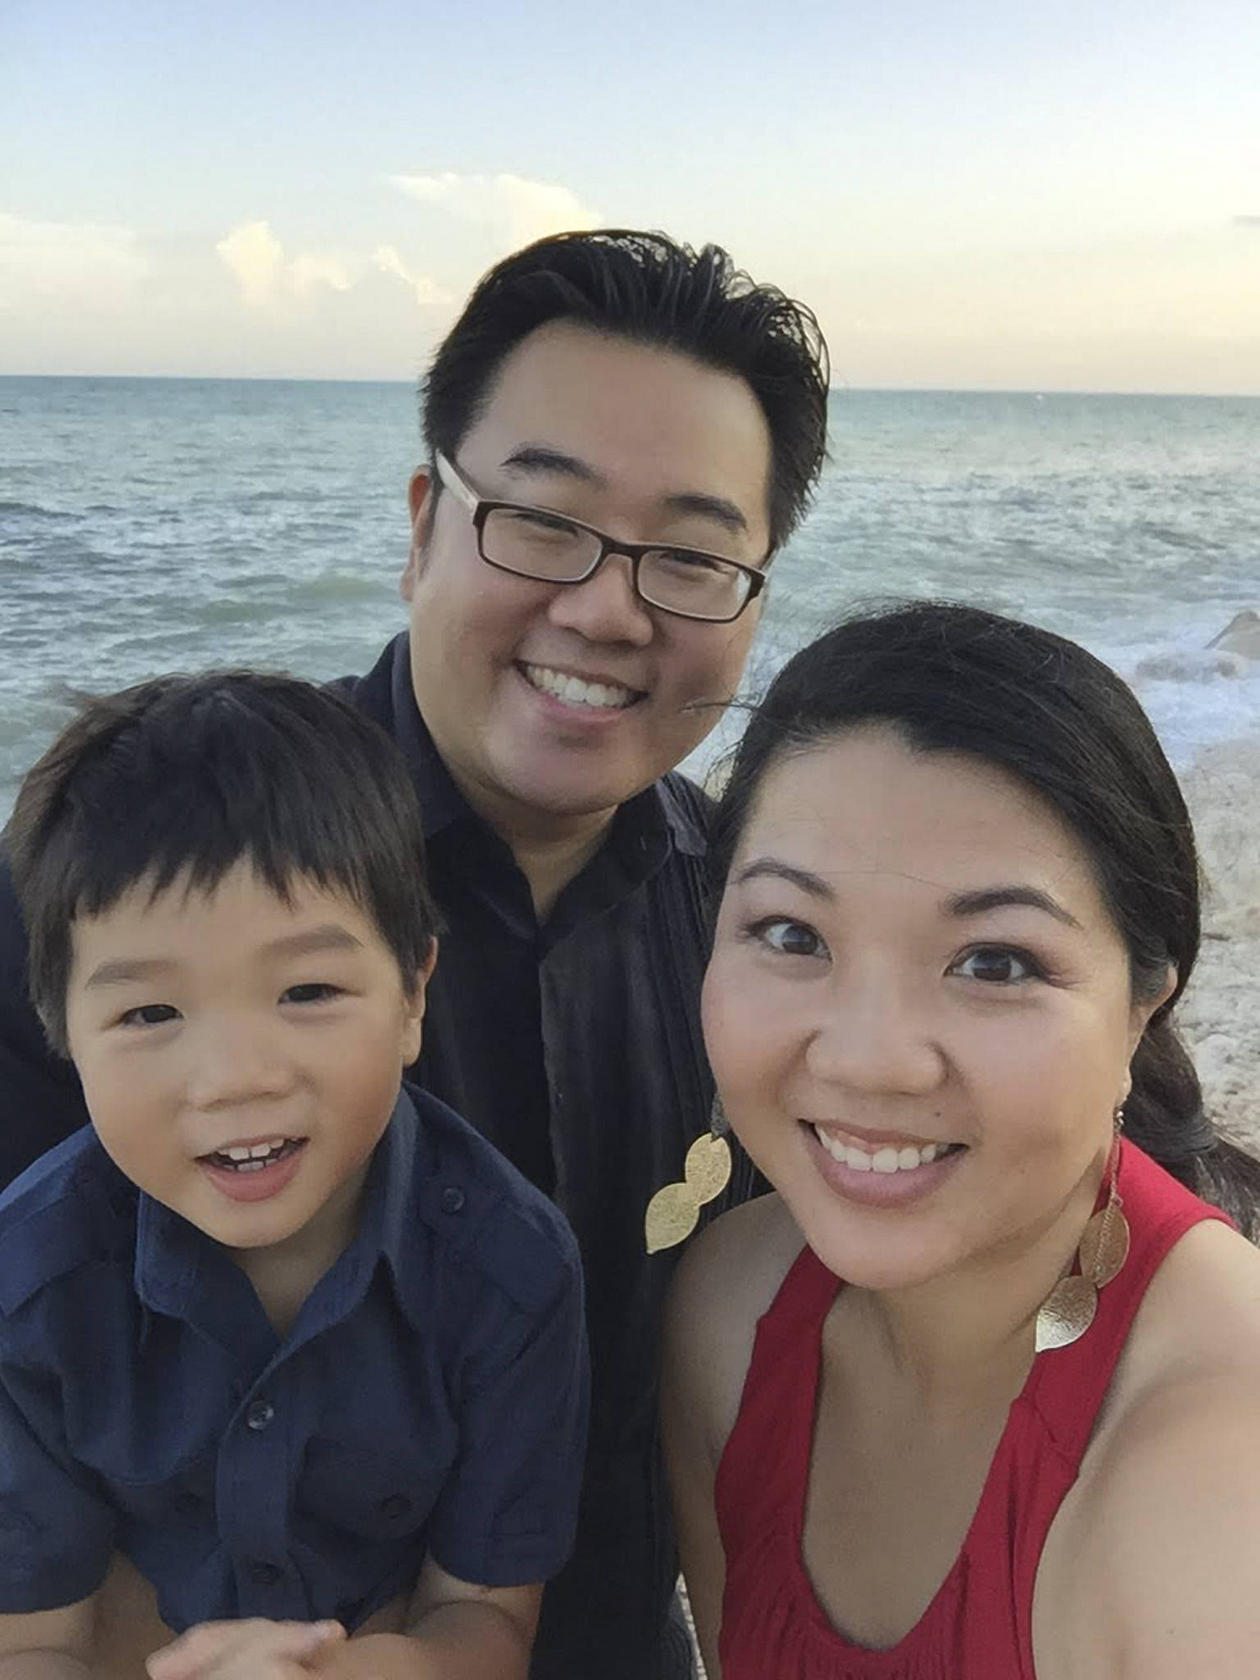 Calvin Tchiang, Melody Chen and their three-year-old son Xavier.